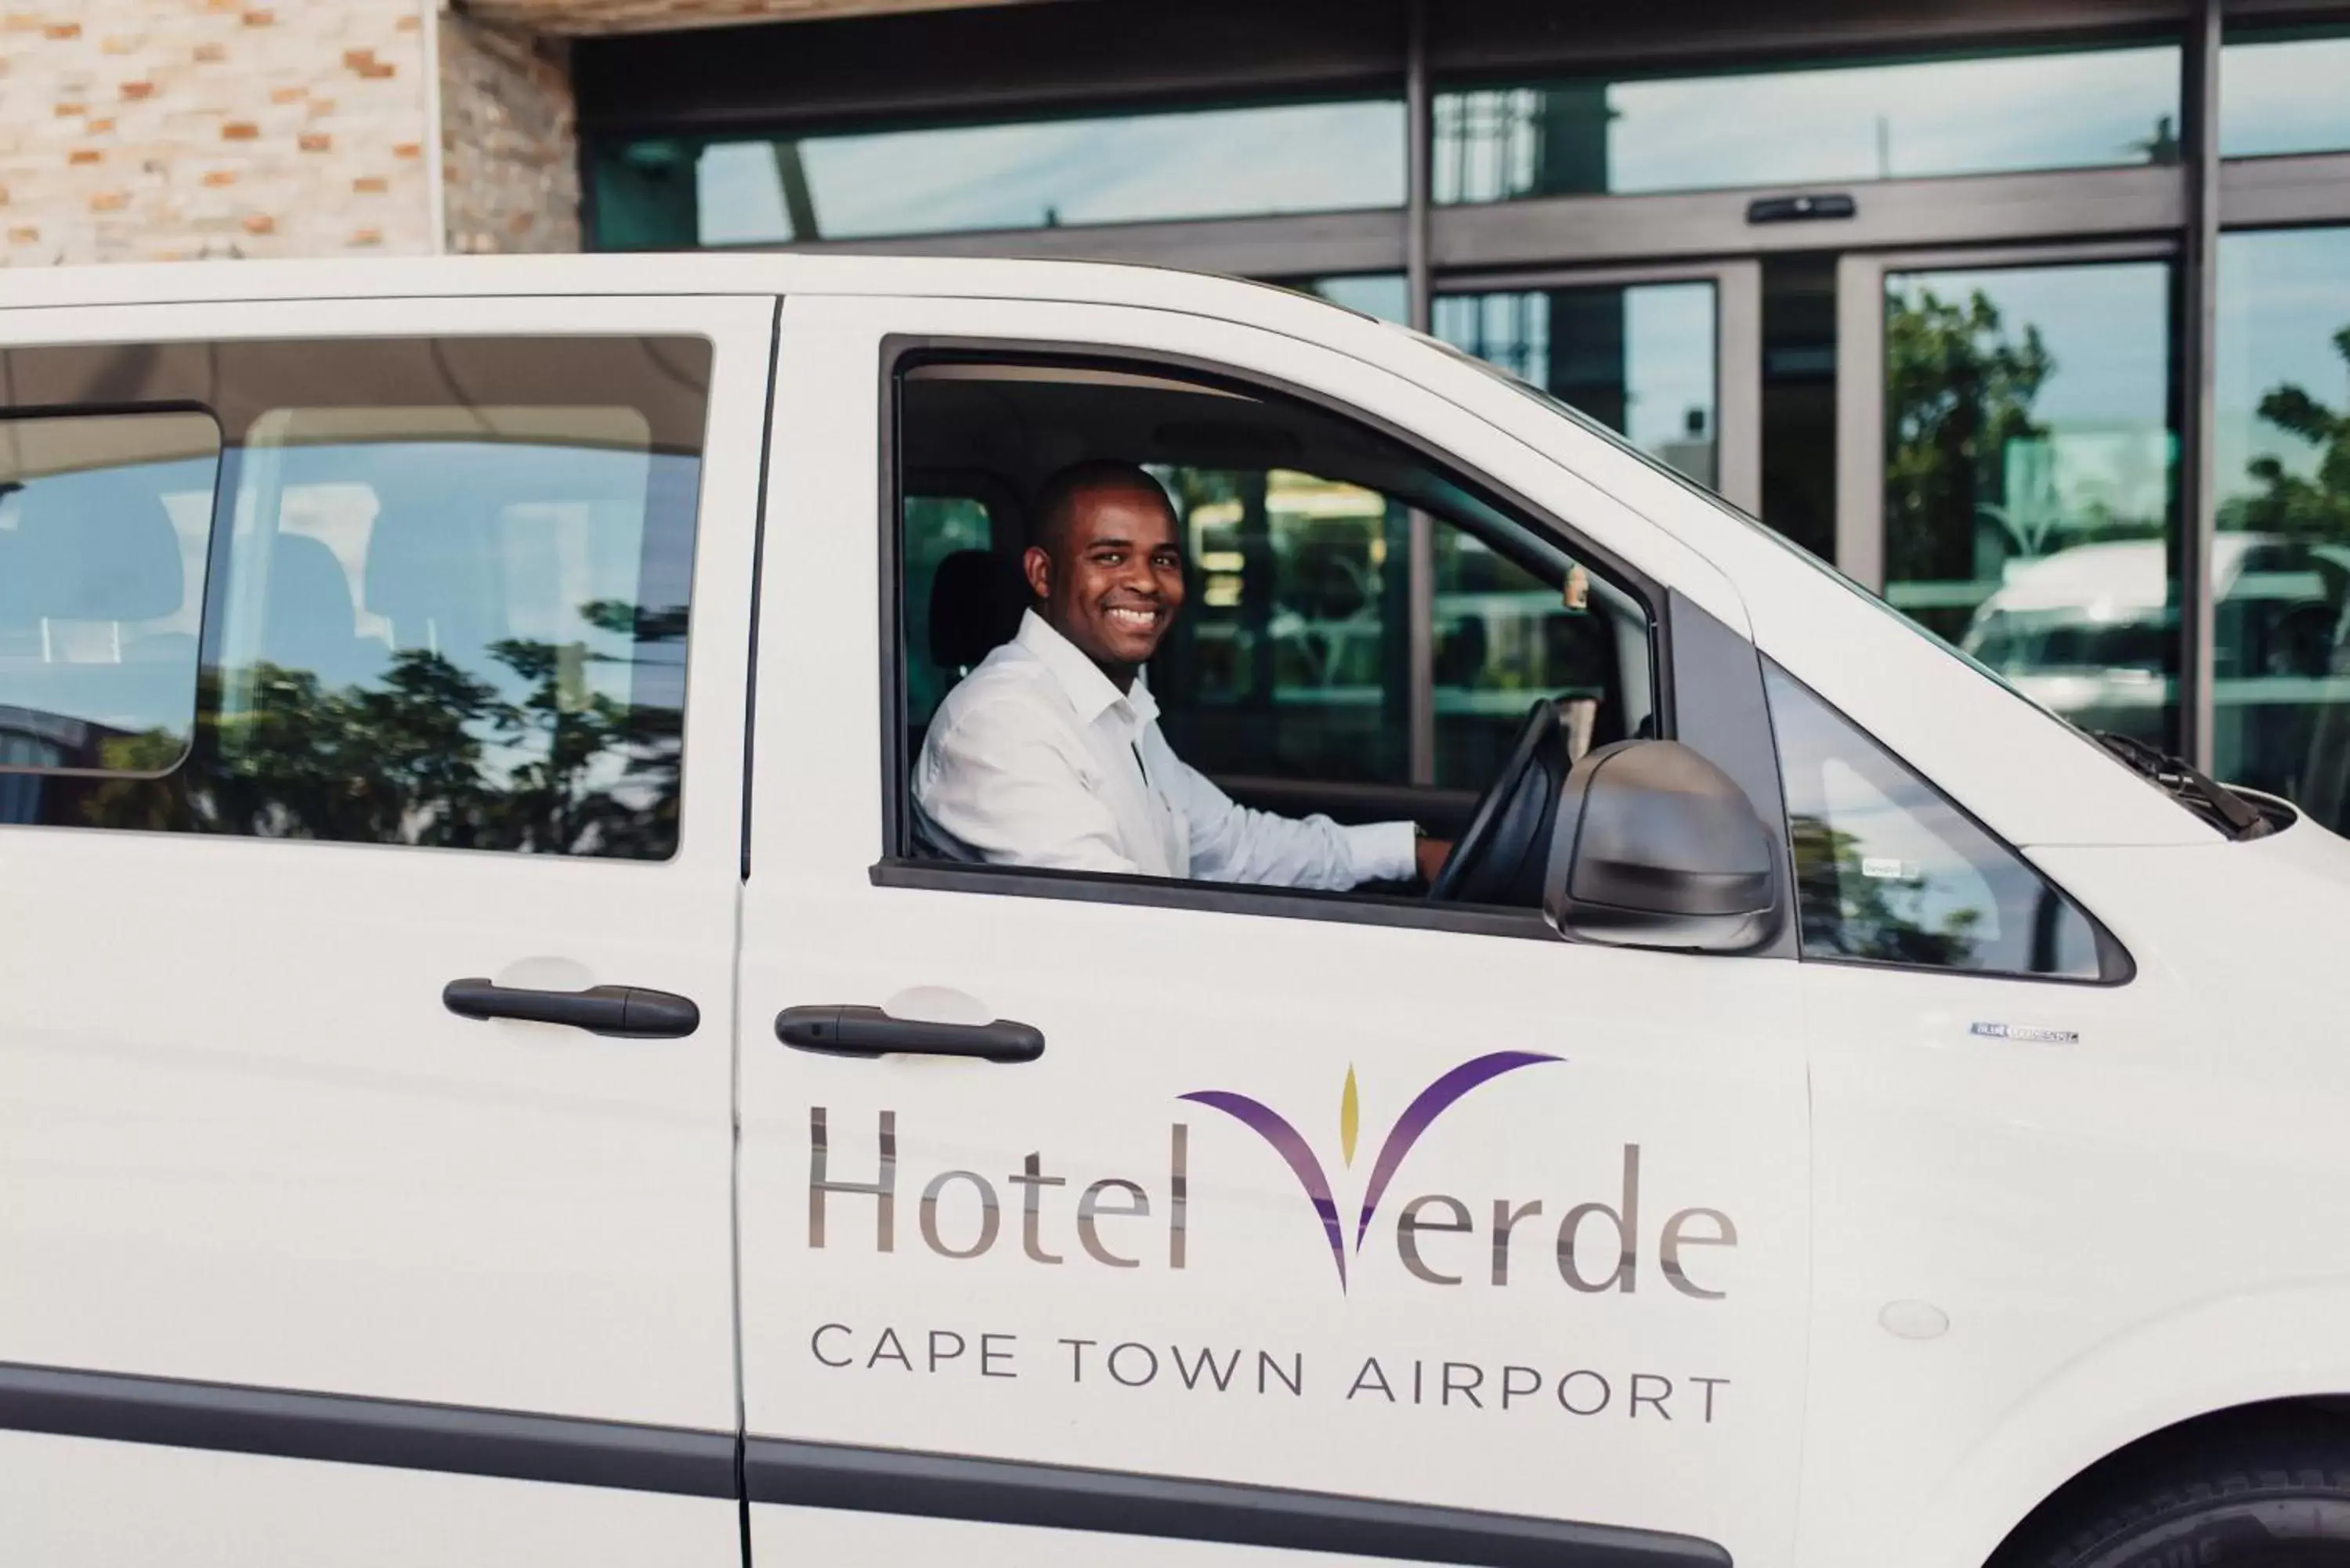 Staff in Hotel Verde Cape Town Airport